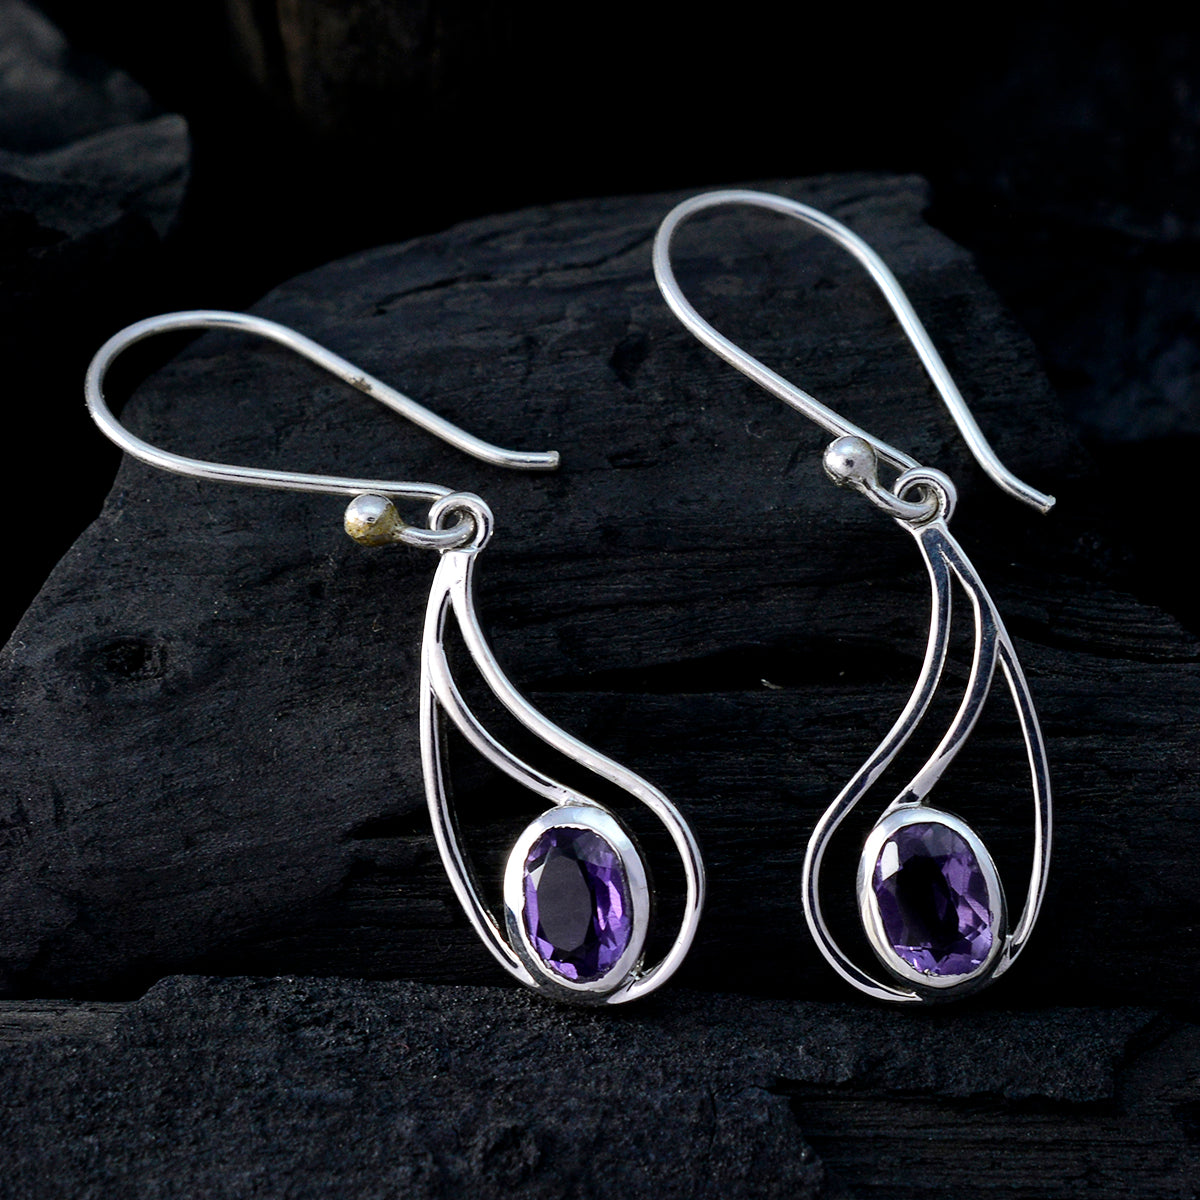 Riyo Real Gemstones oval Faceted Purple Amethyst Silver Earrings gift for easter Sunday